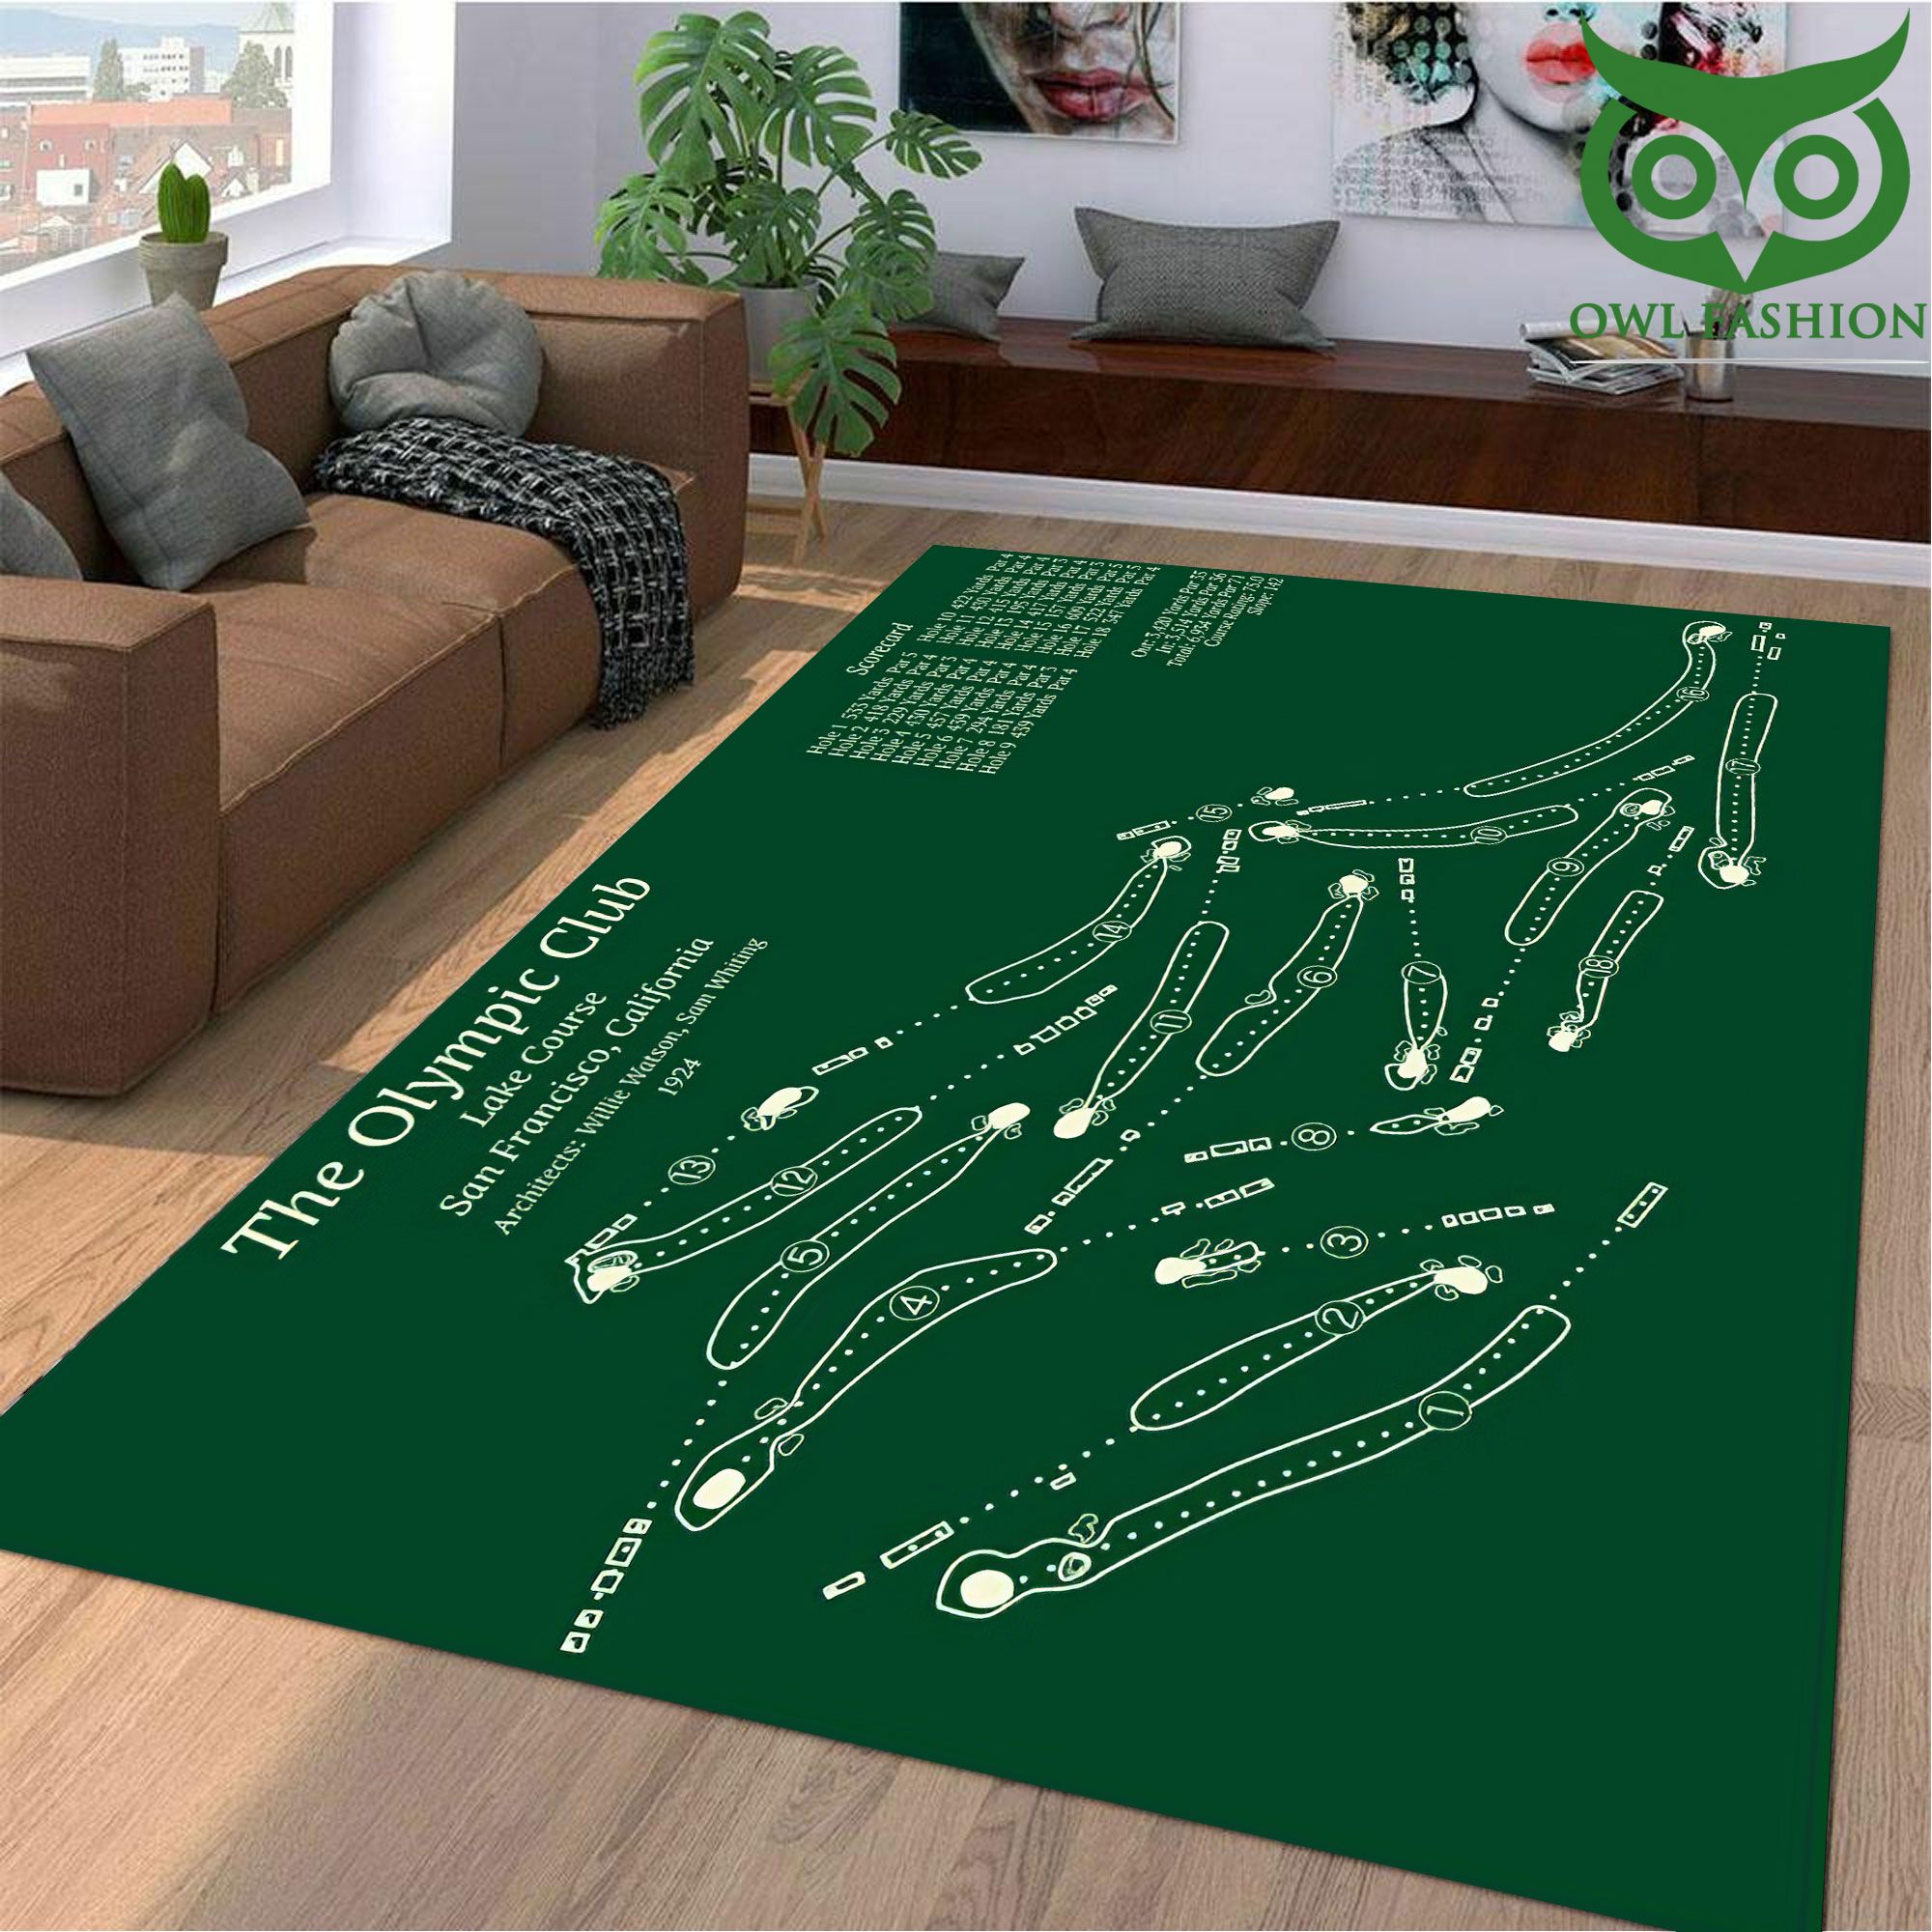 32 The olympic club golf course map Printed Carpet Rug